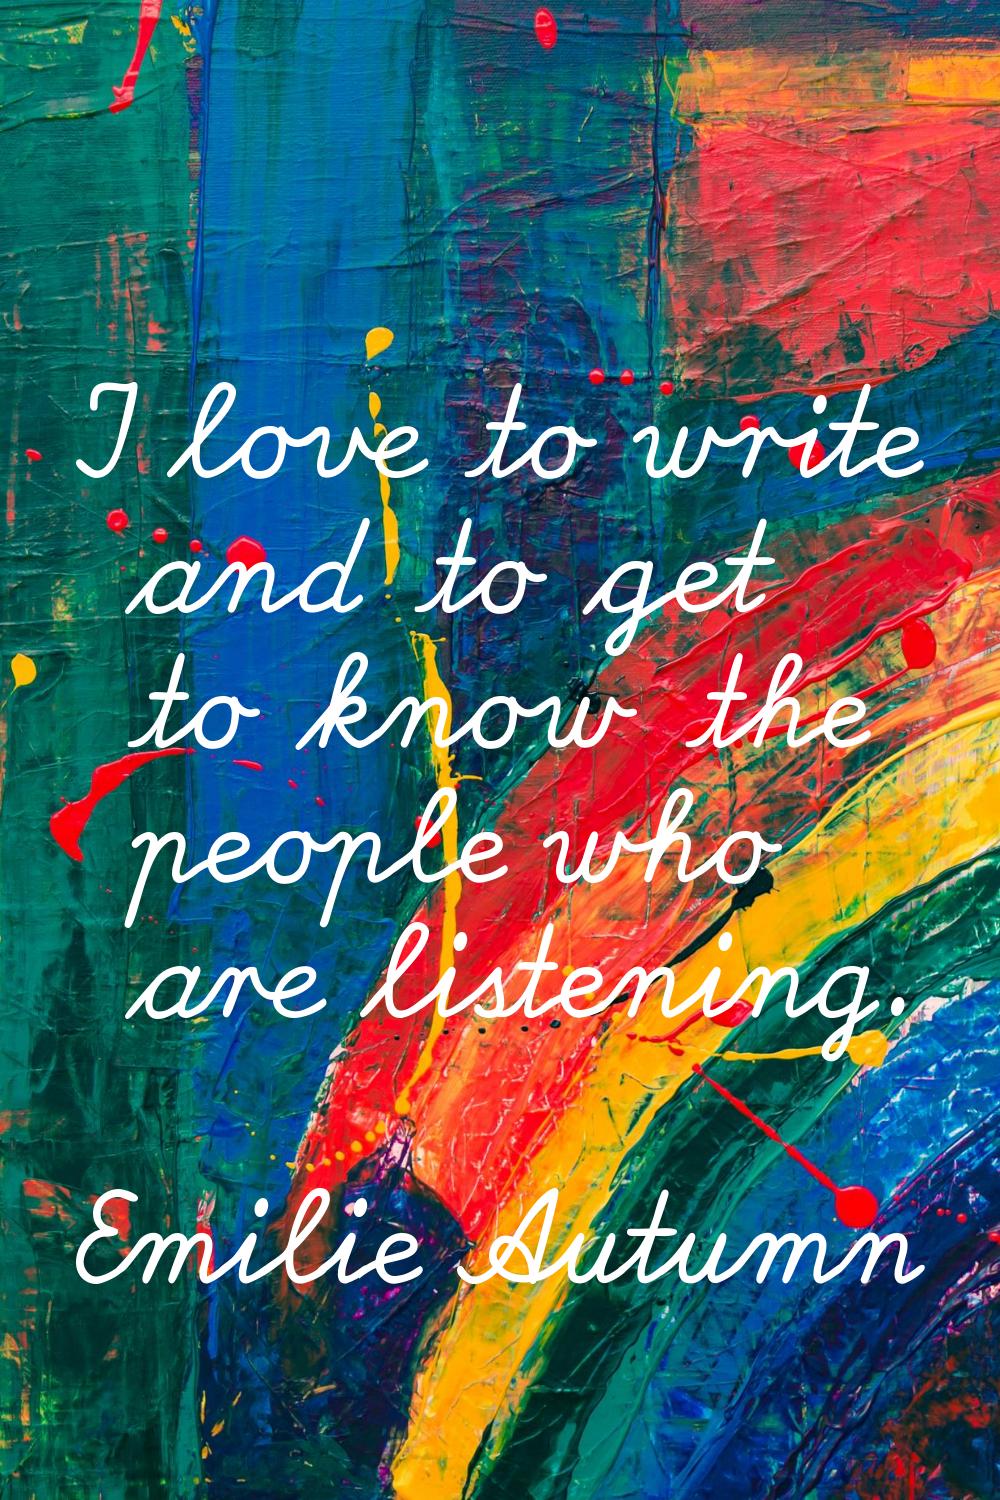 I love to write and to get to know the people who are listening.